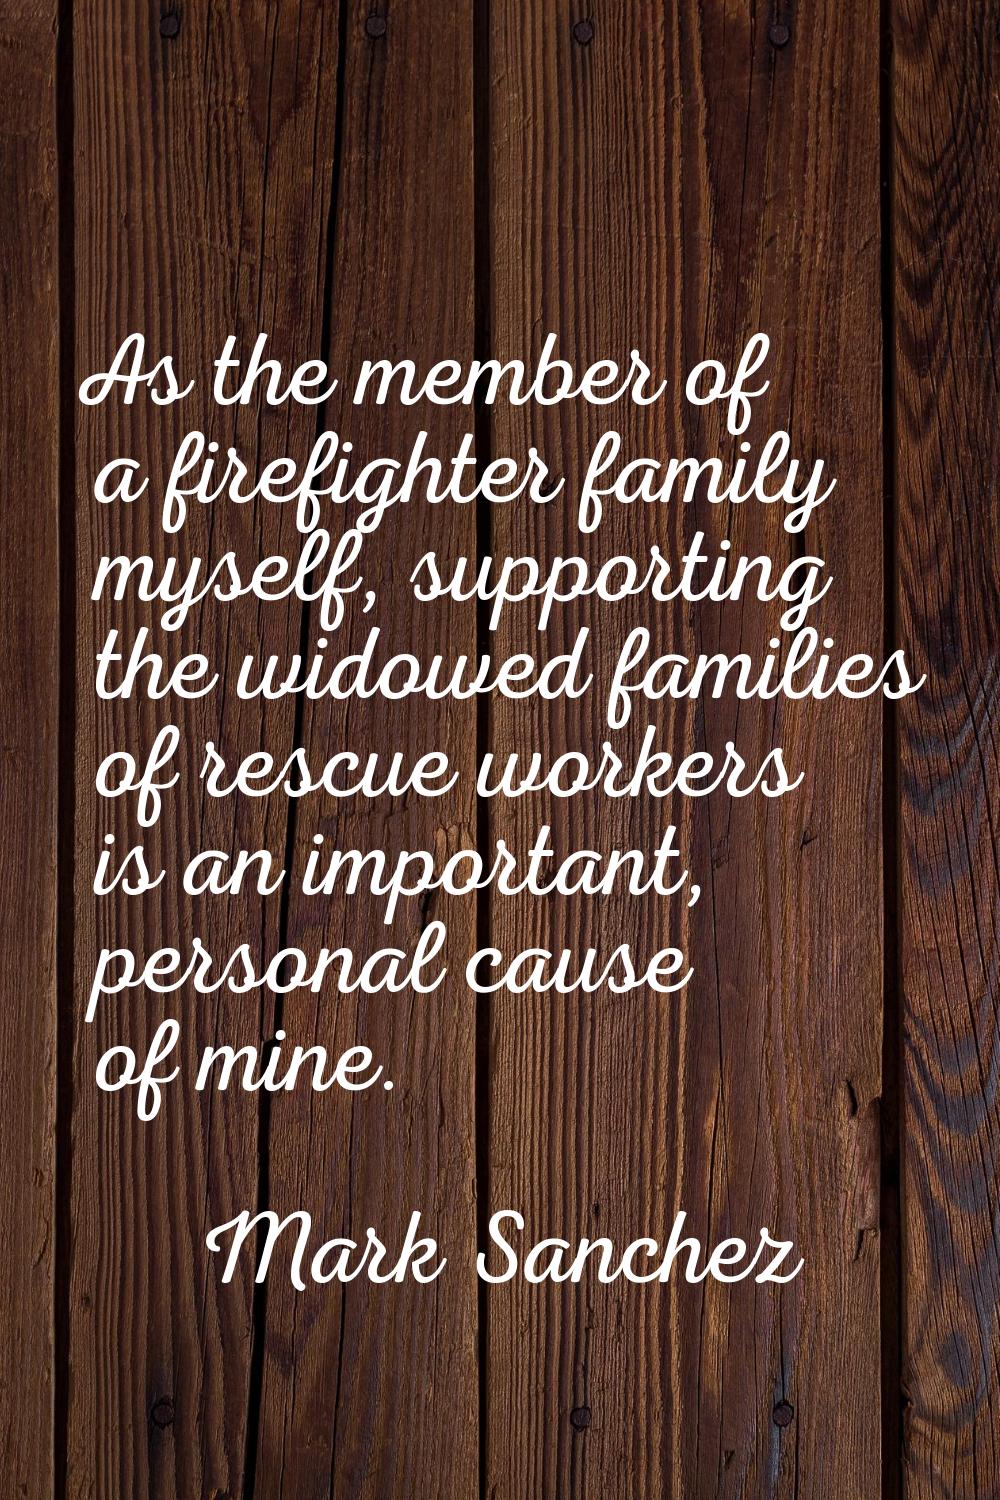 As the member of a firefighter family myself, supporting the widowed families of rescue workers is 